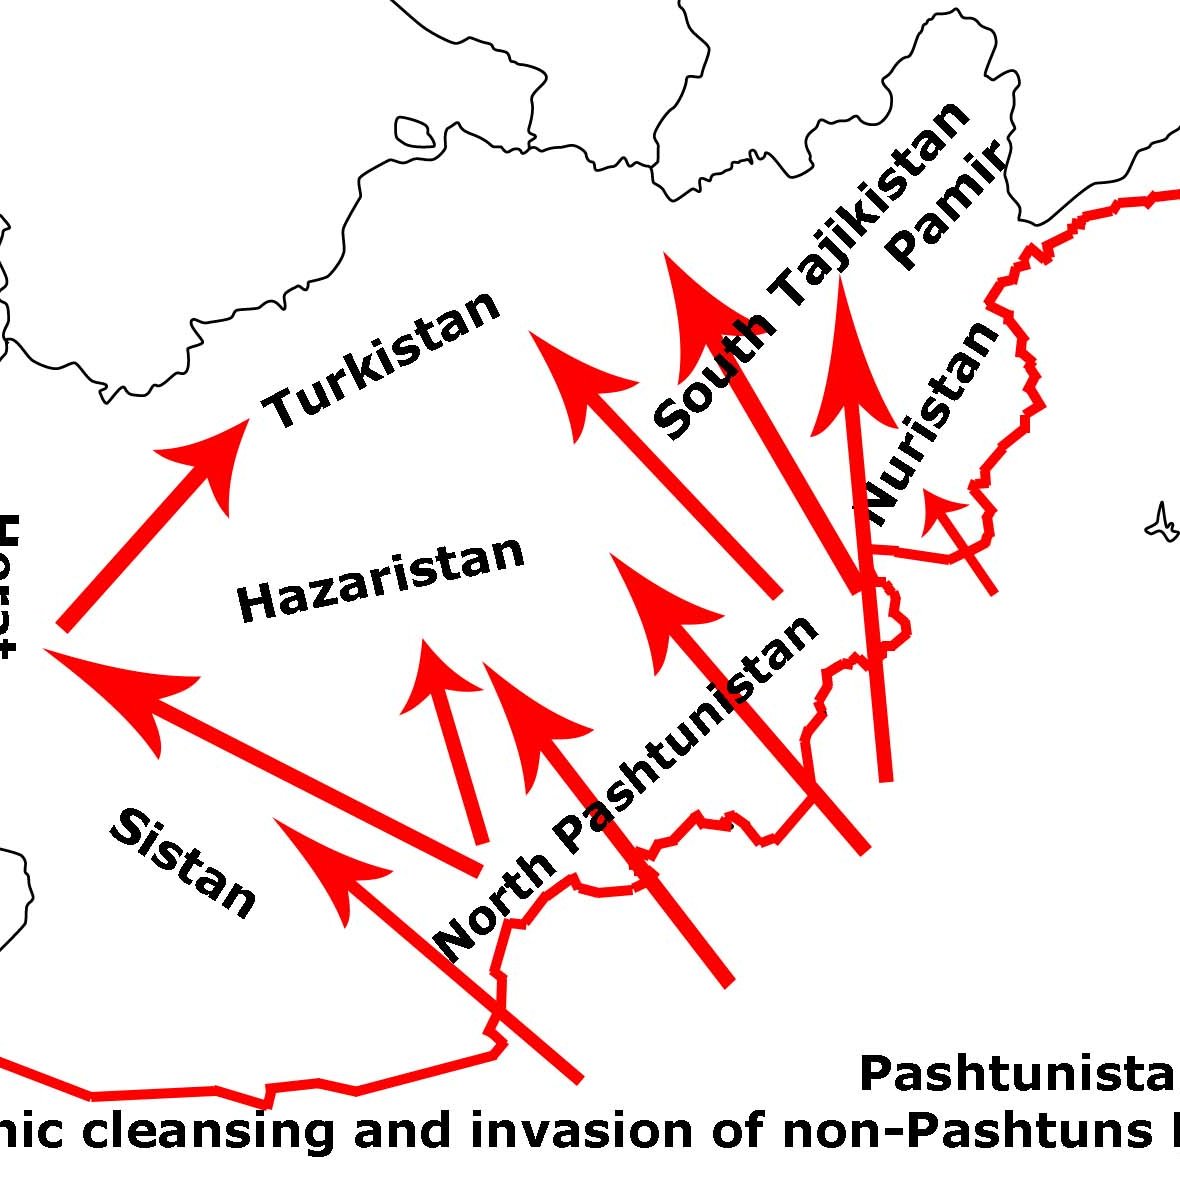 Taliban Displace Hazara and Uzbek by Force to Settle Pashtuns on Their Lands